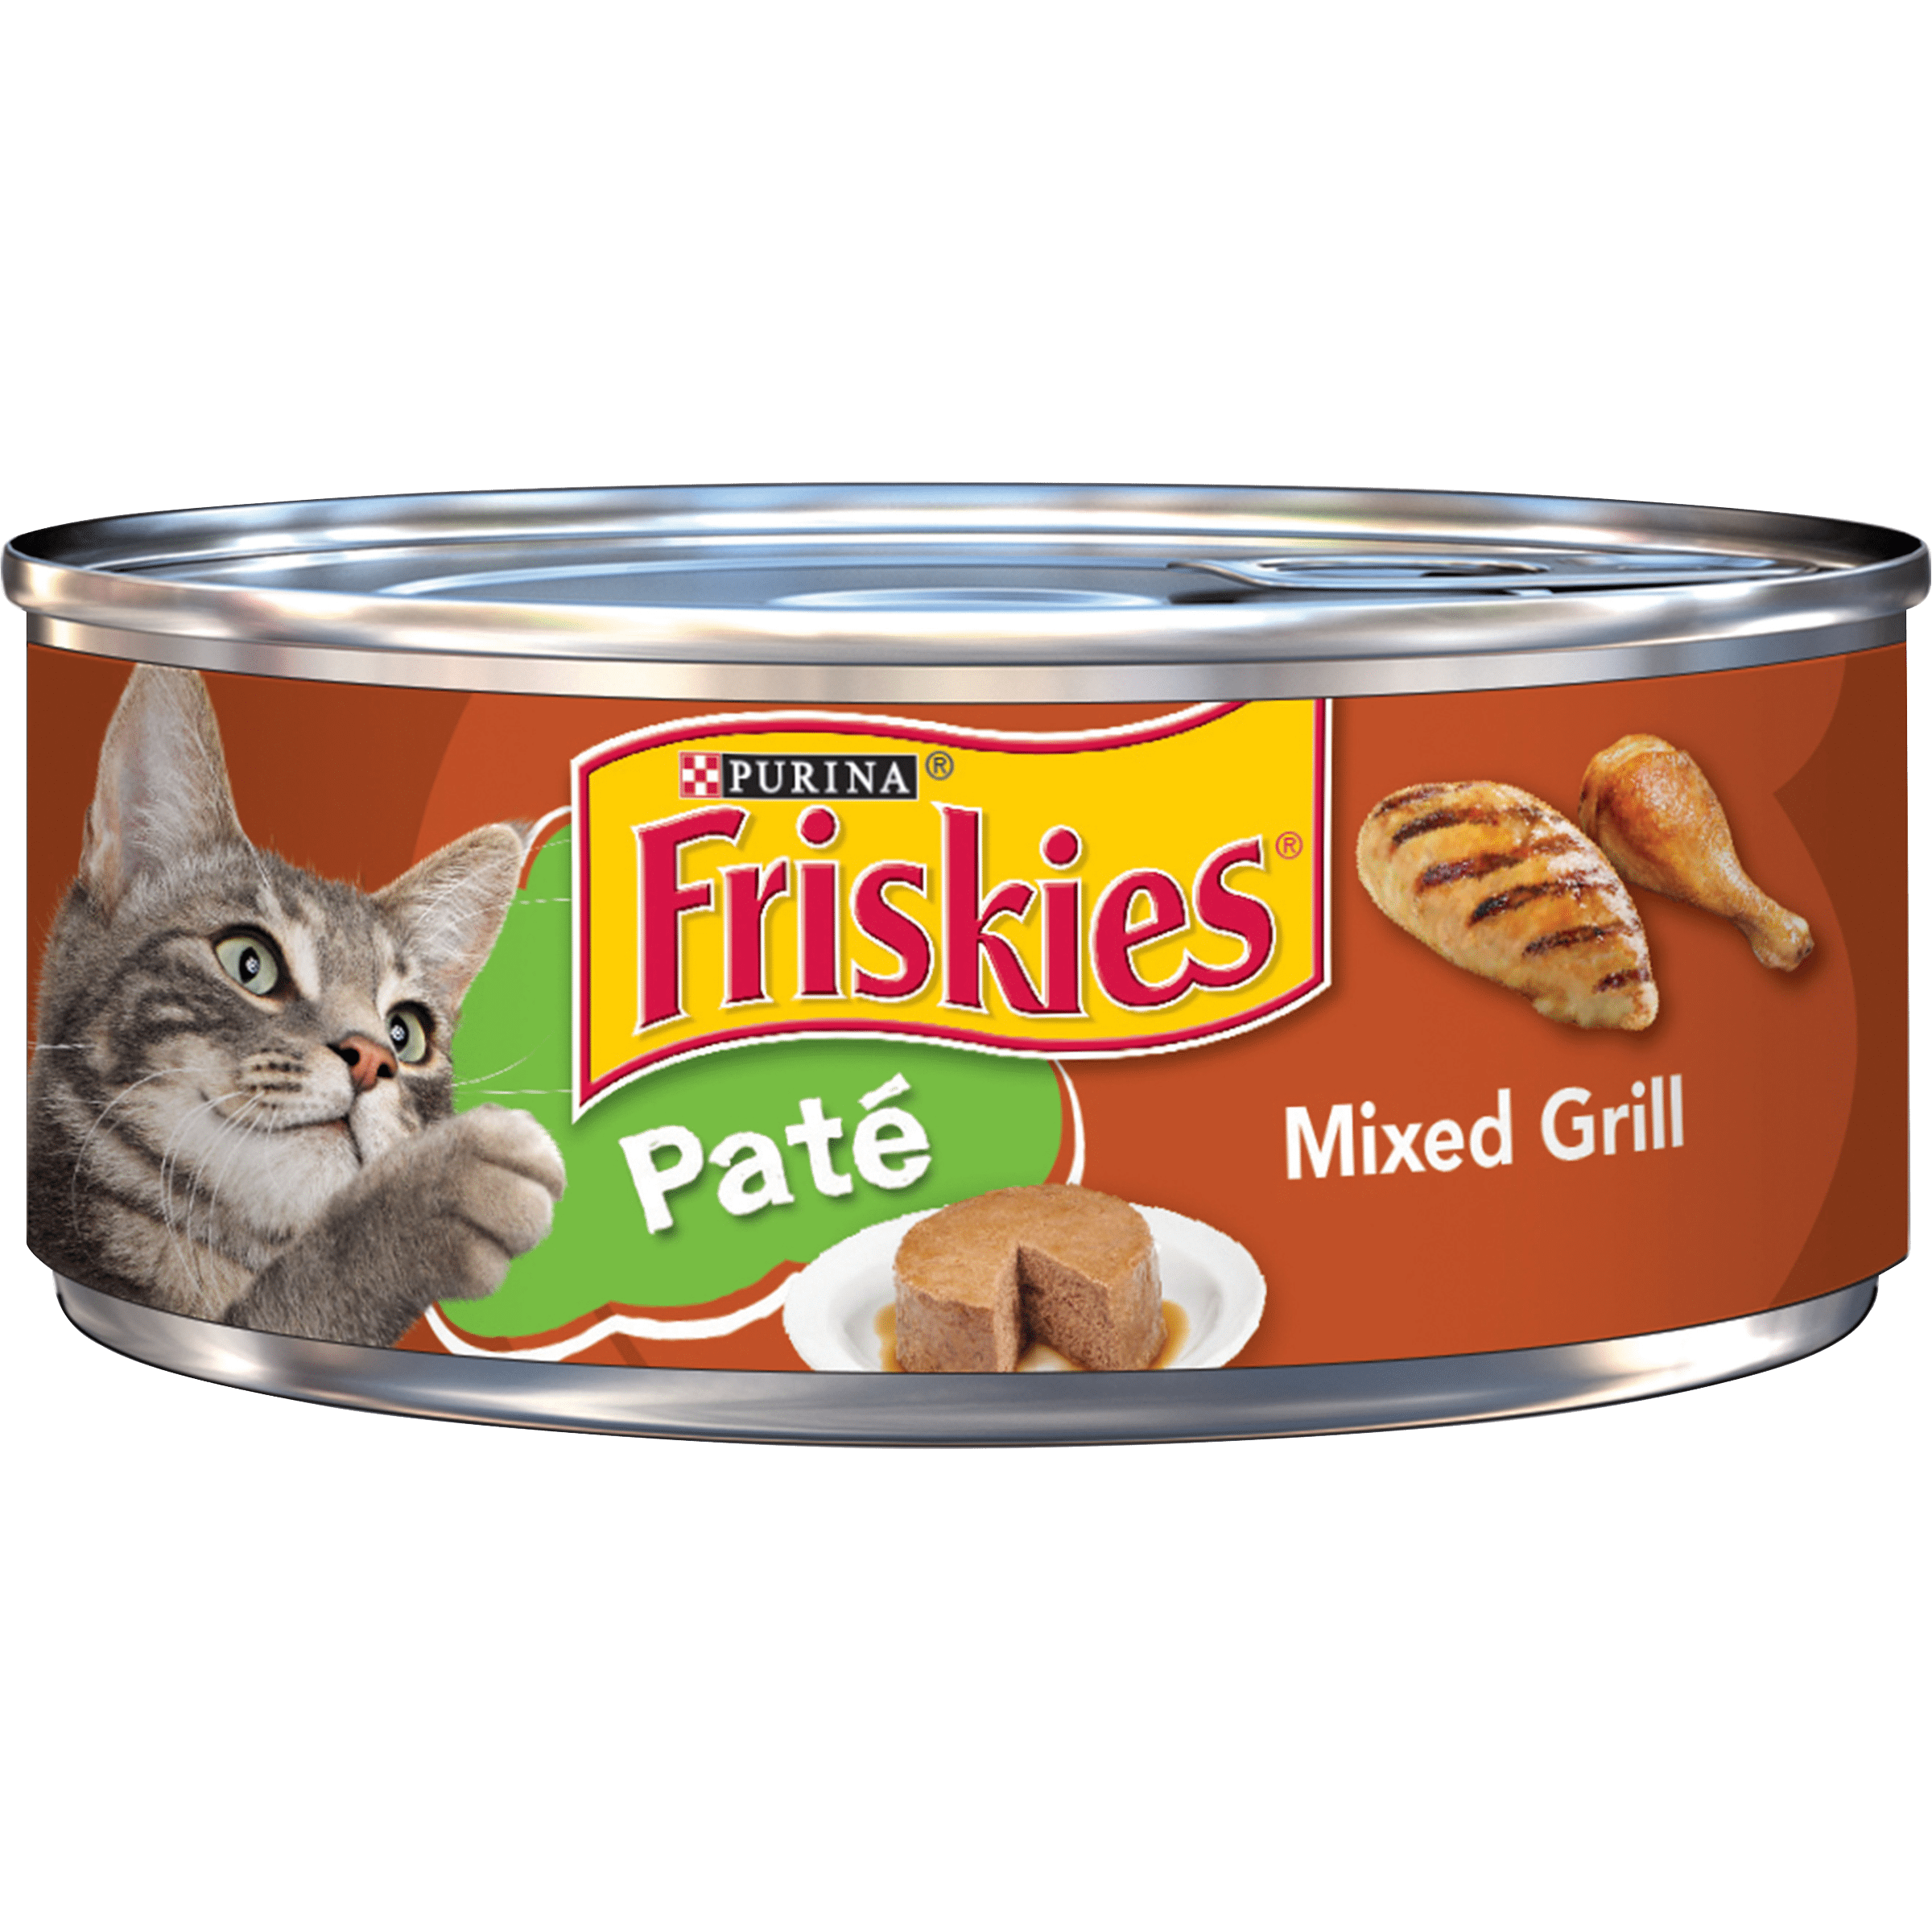 Friskies Pate Wet Cat Food, Pate Mixed Grill, 5.5 oz. Can